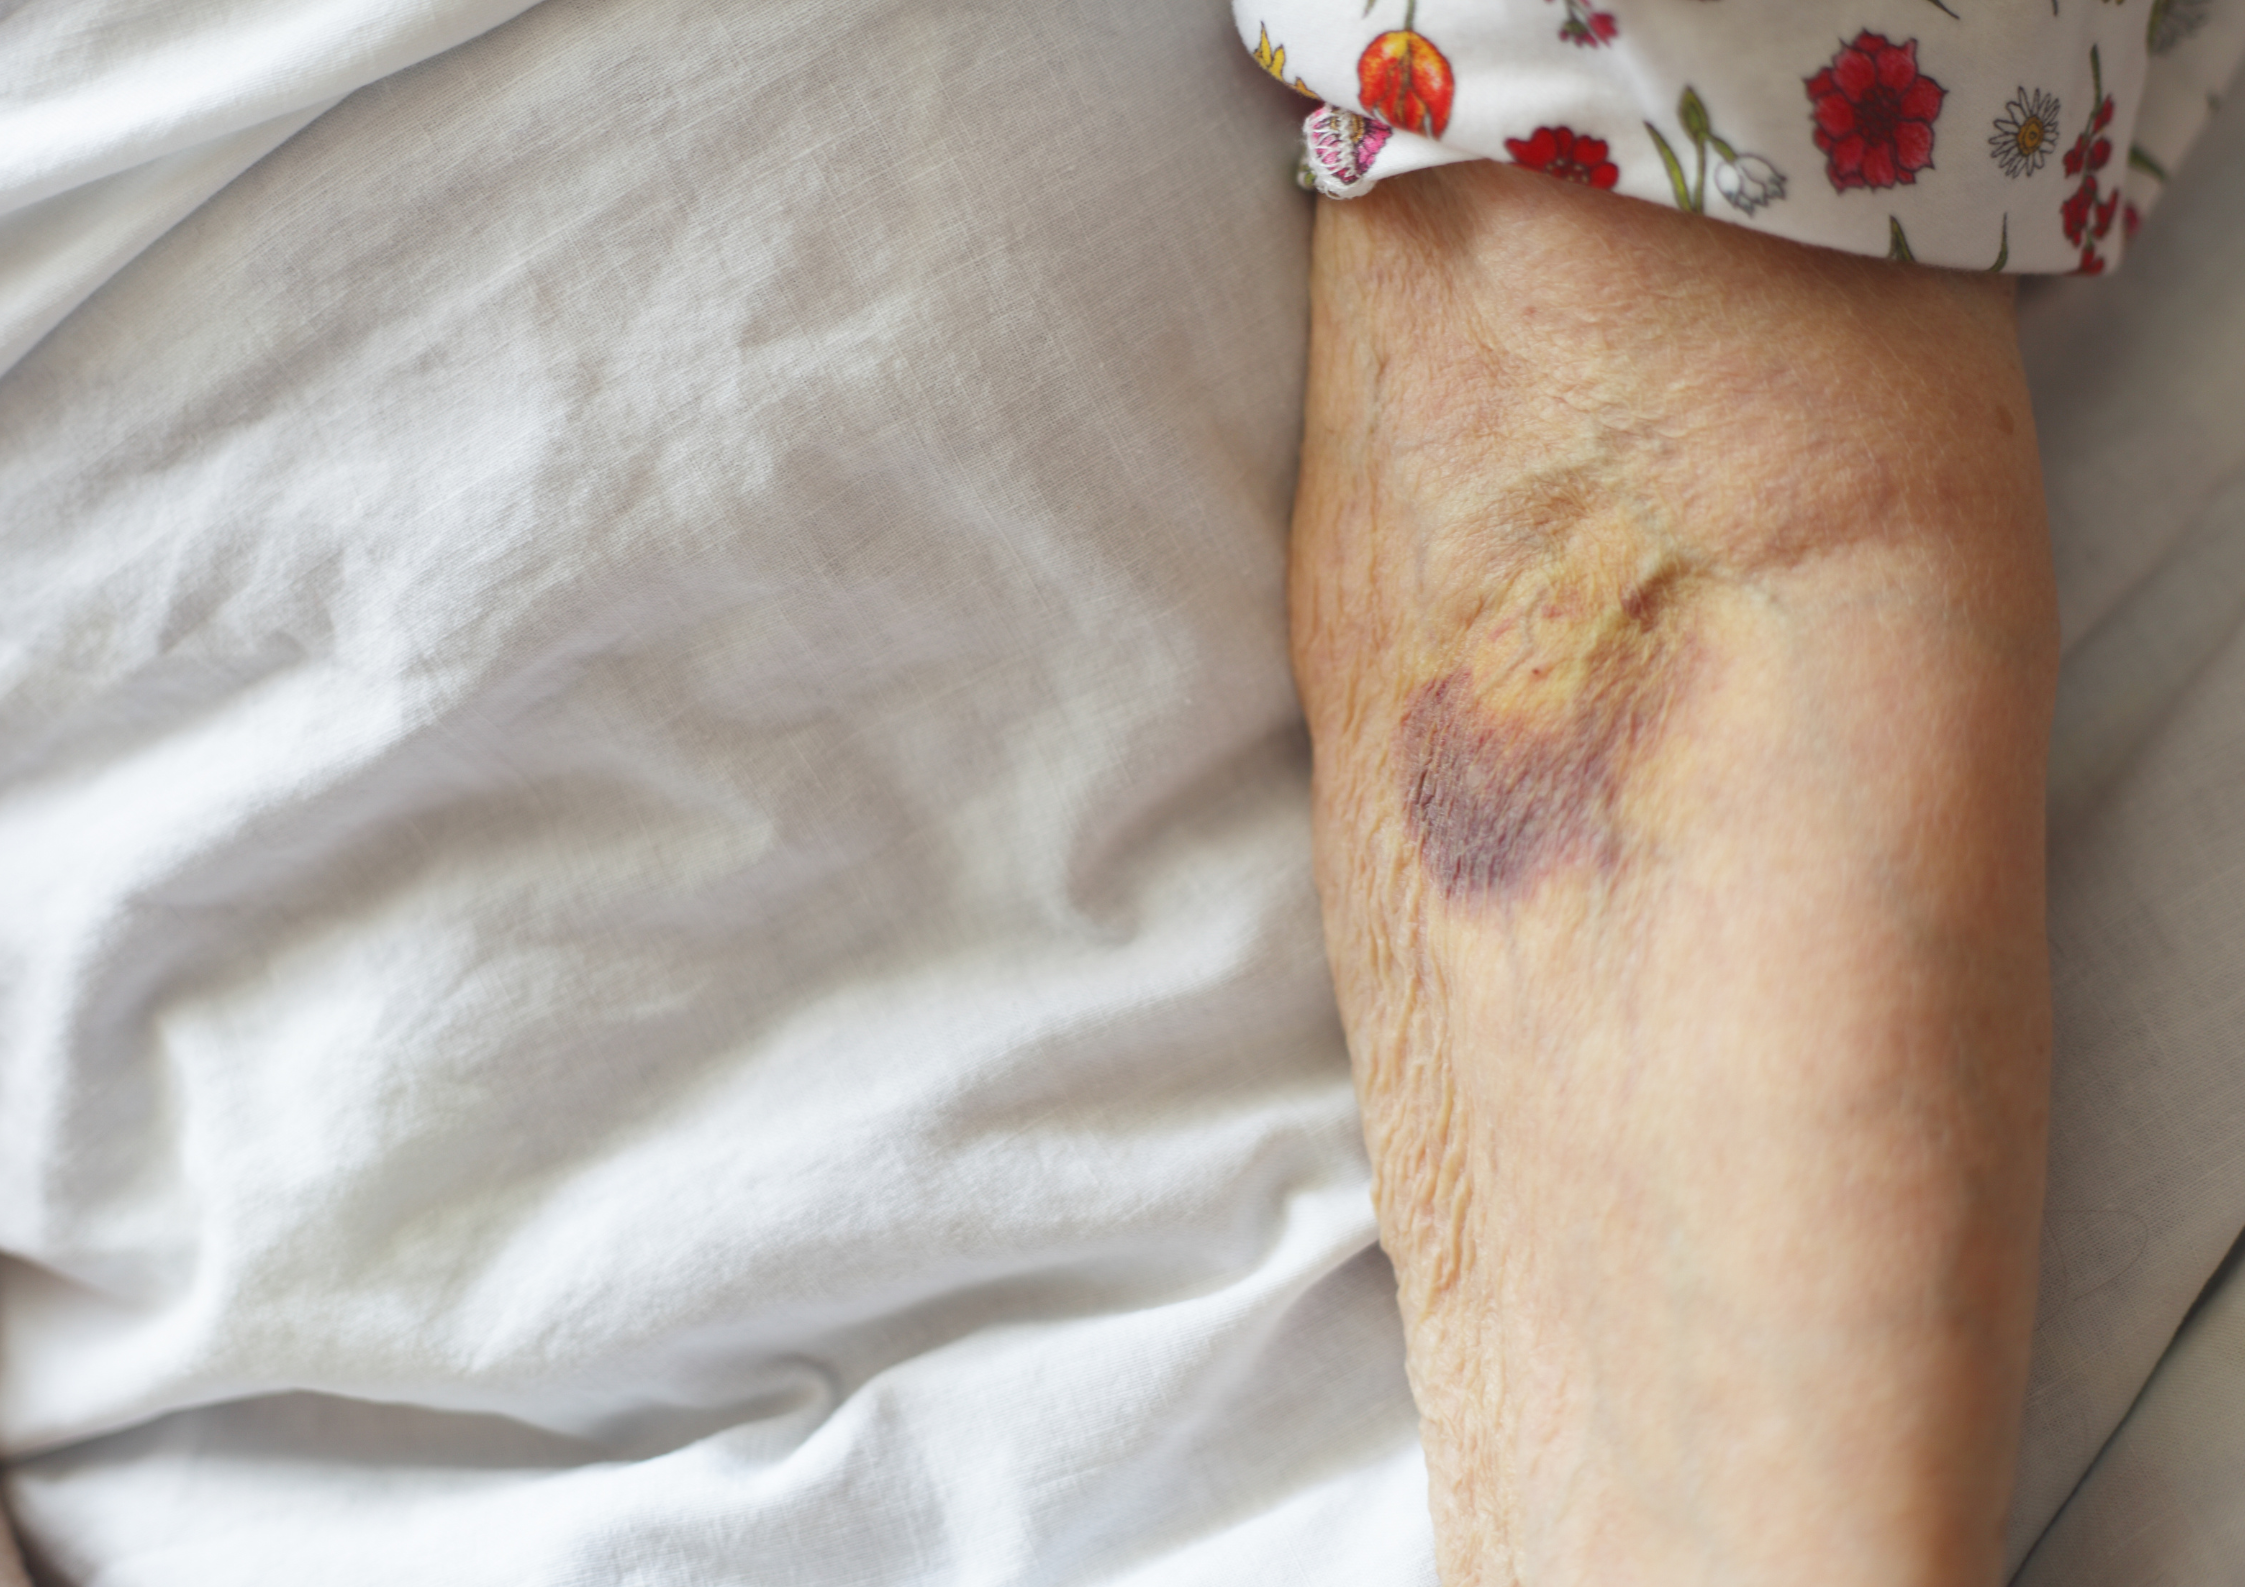 Unexplained Bruising on Hands & Arms? Learn About Solar Purpura